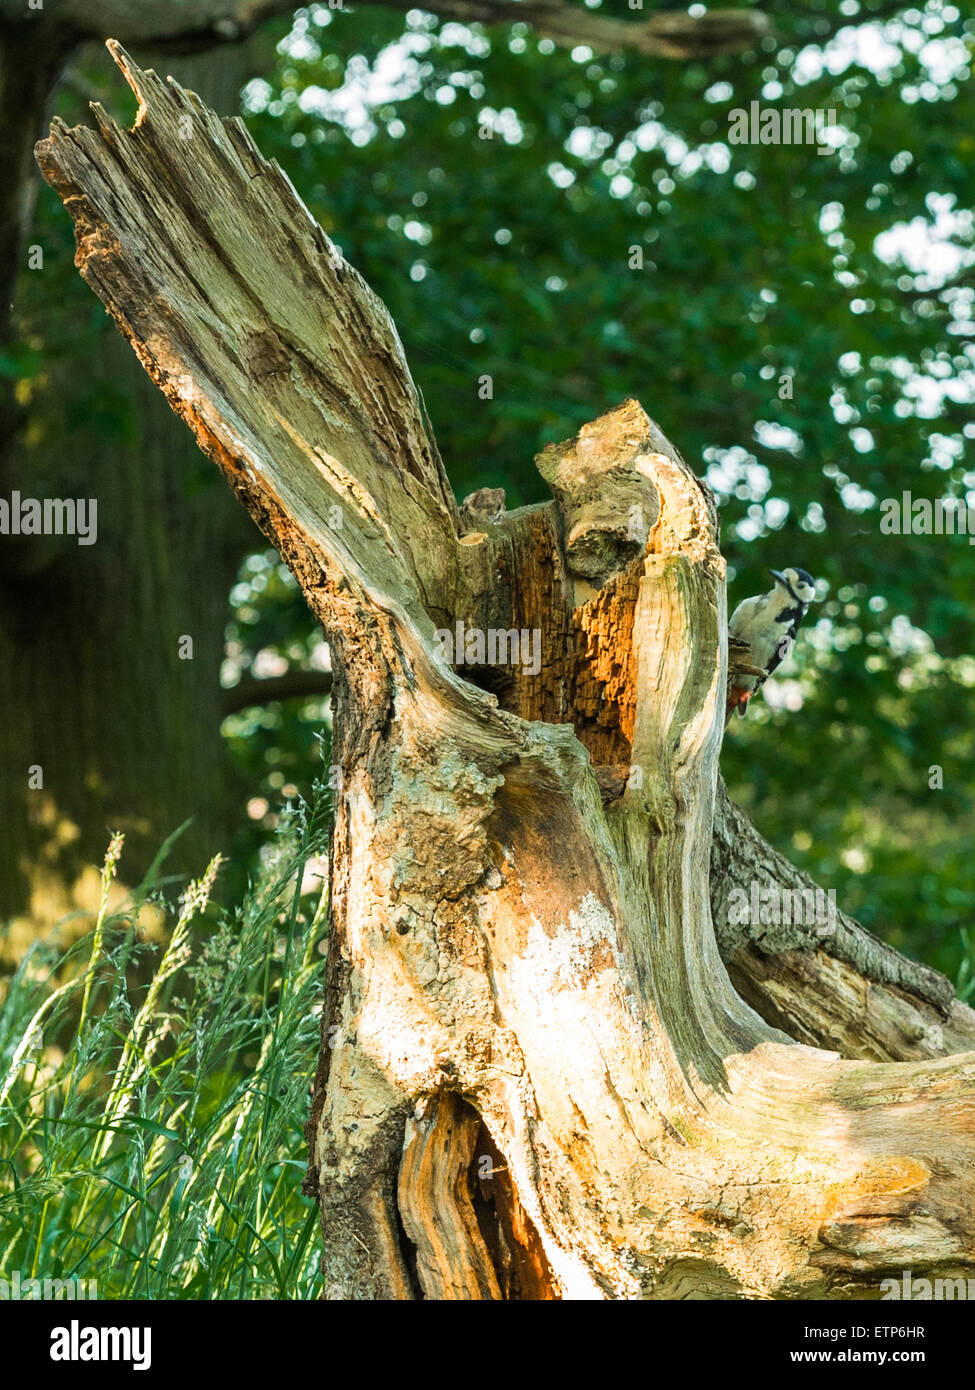 British Wildlife, Great Spotted Woodpecker foraging in natural woodland setting. Stock Photo